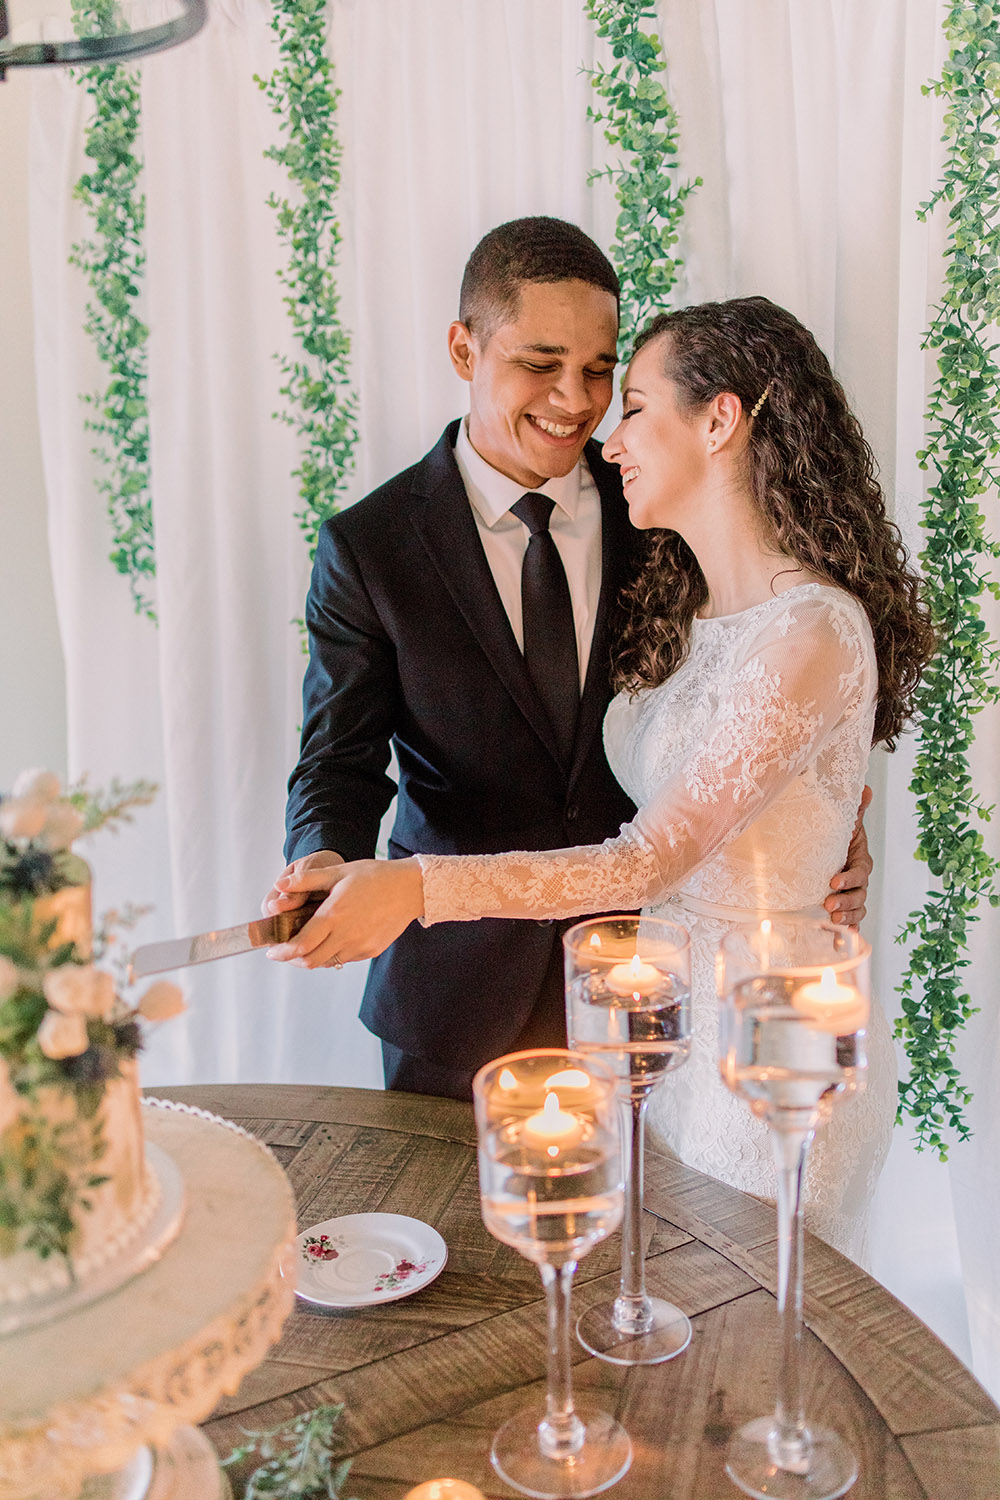 The bride and groom cut the wedding cake. Photo: Ashley Kristen Photography